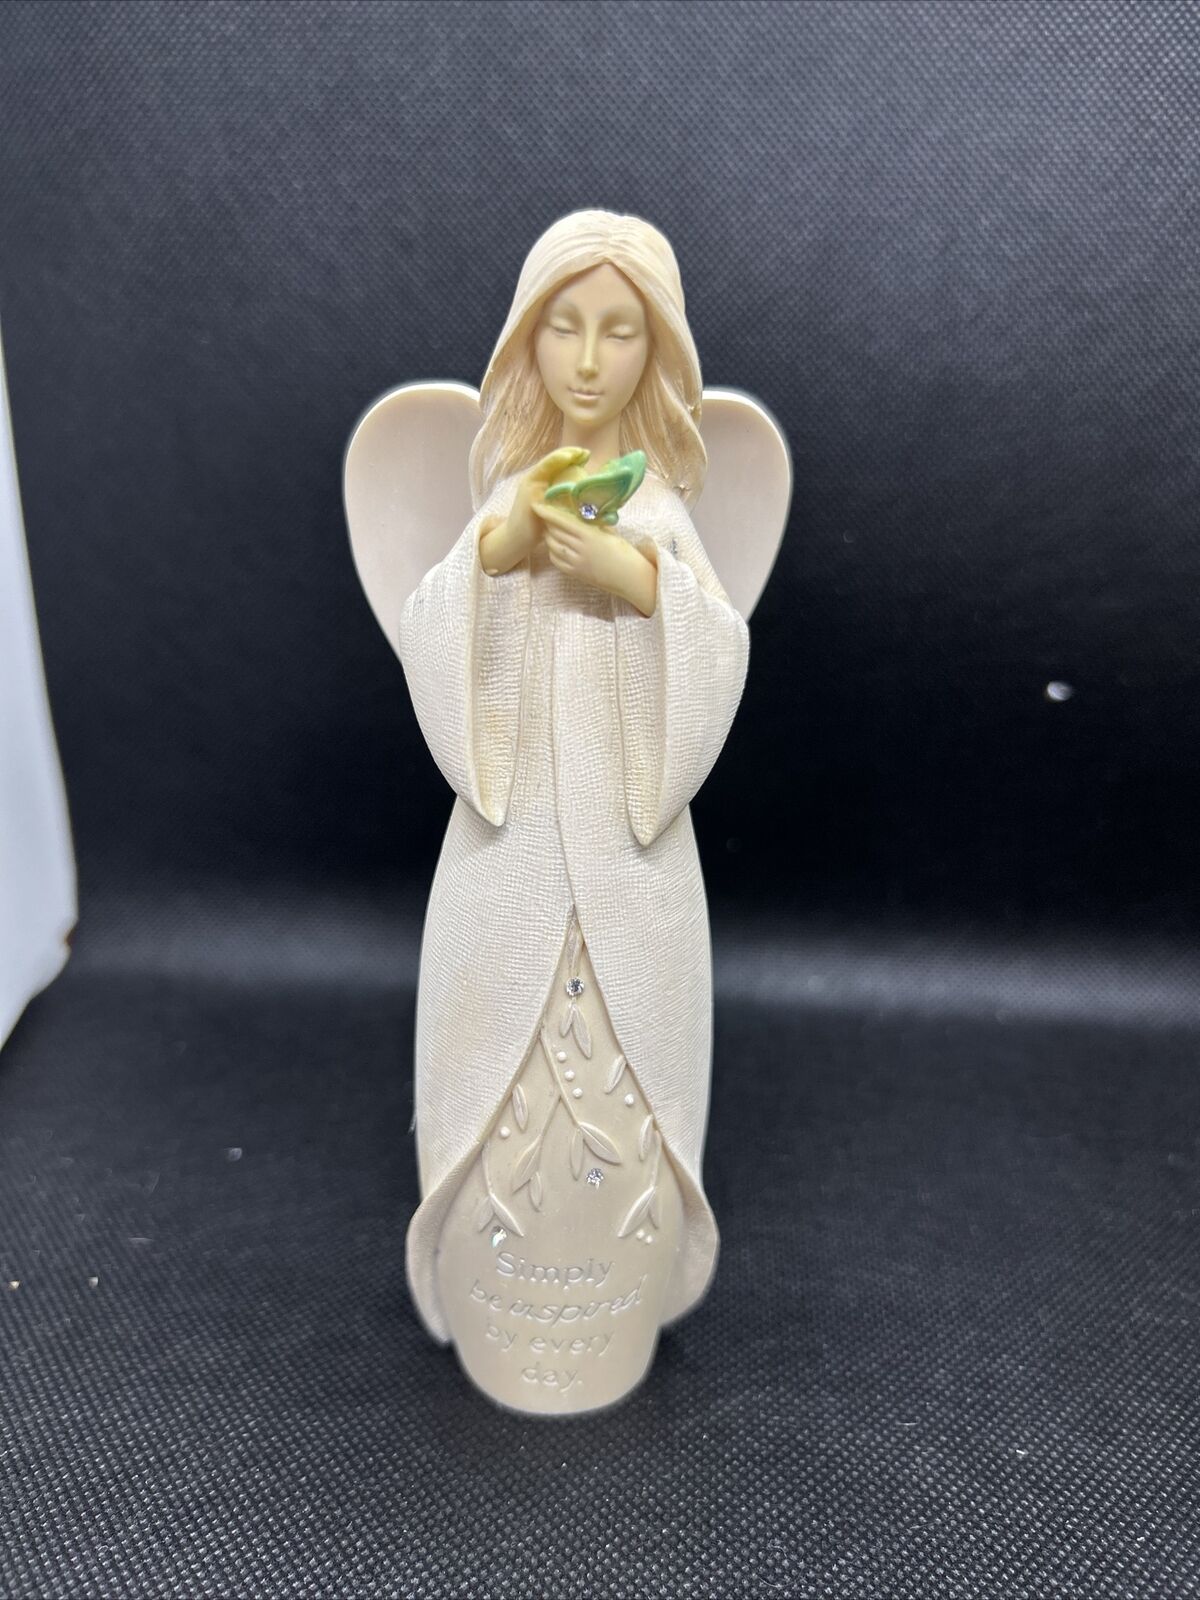 Angel Simply Be Inspired Every Day Figurine by Foundations 4049240